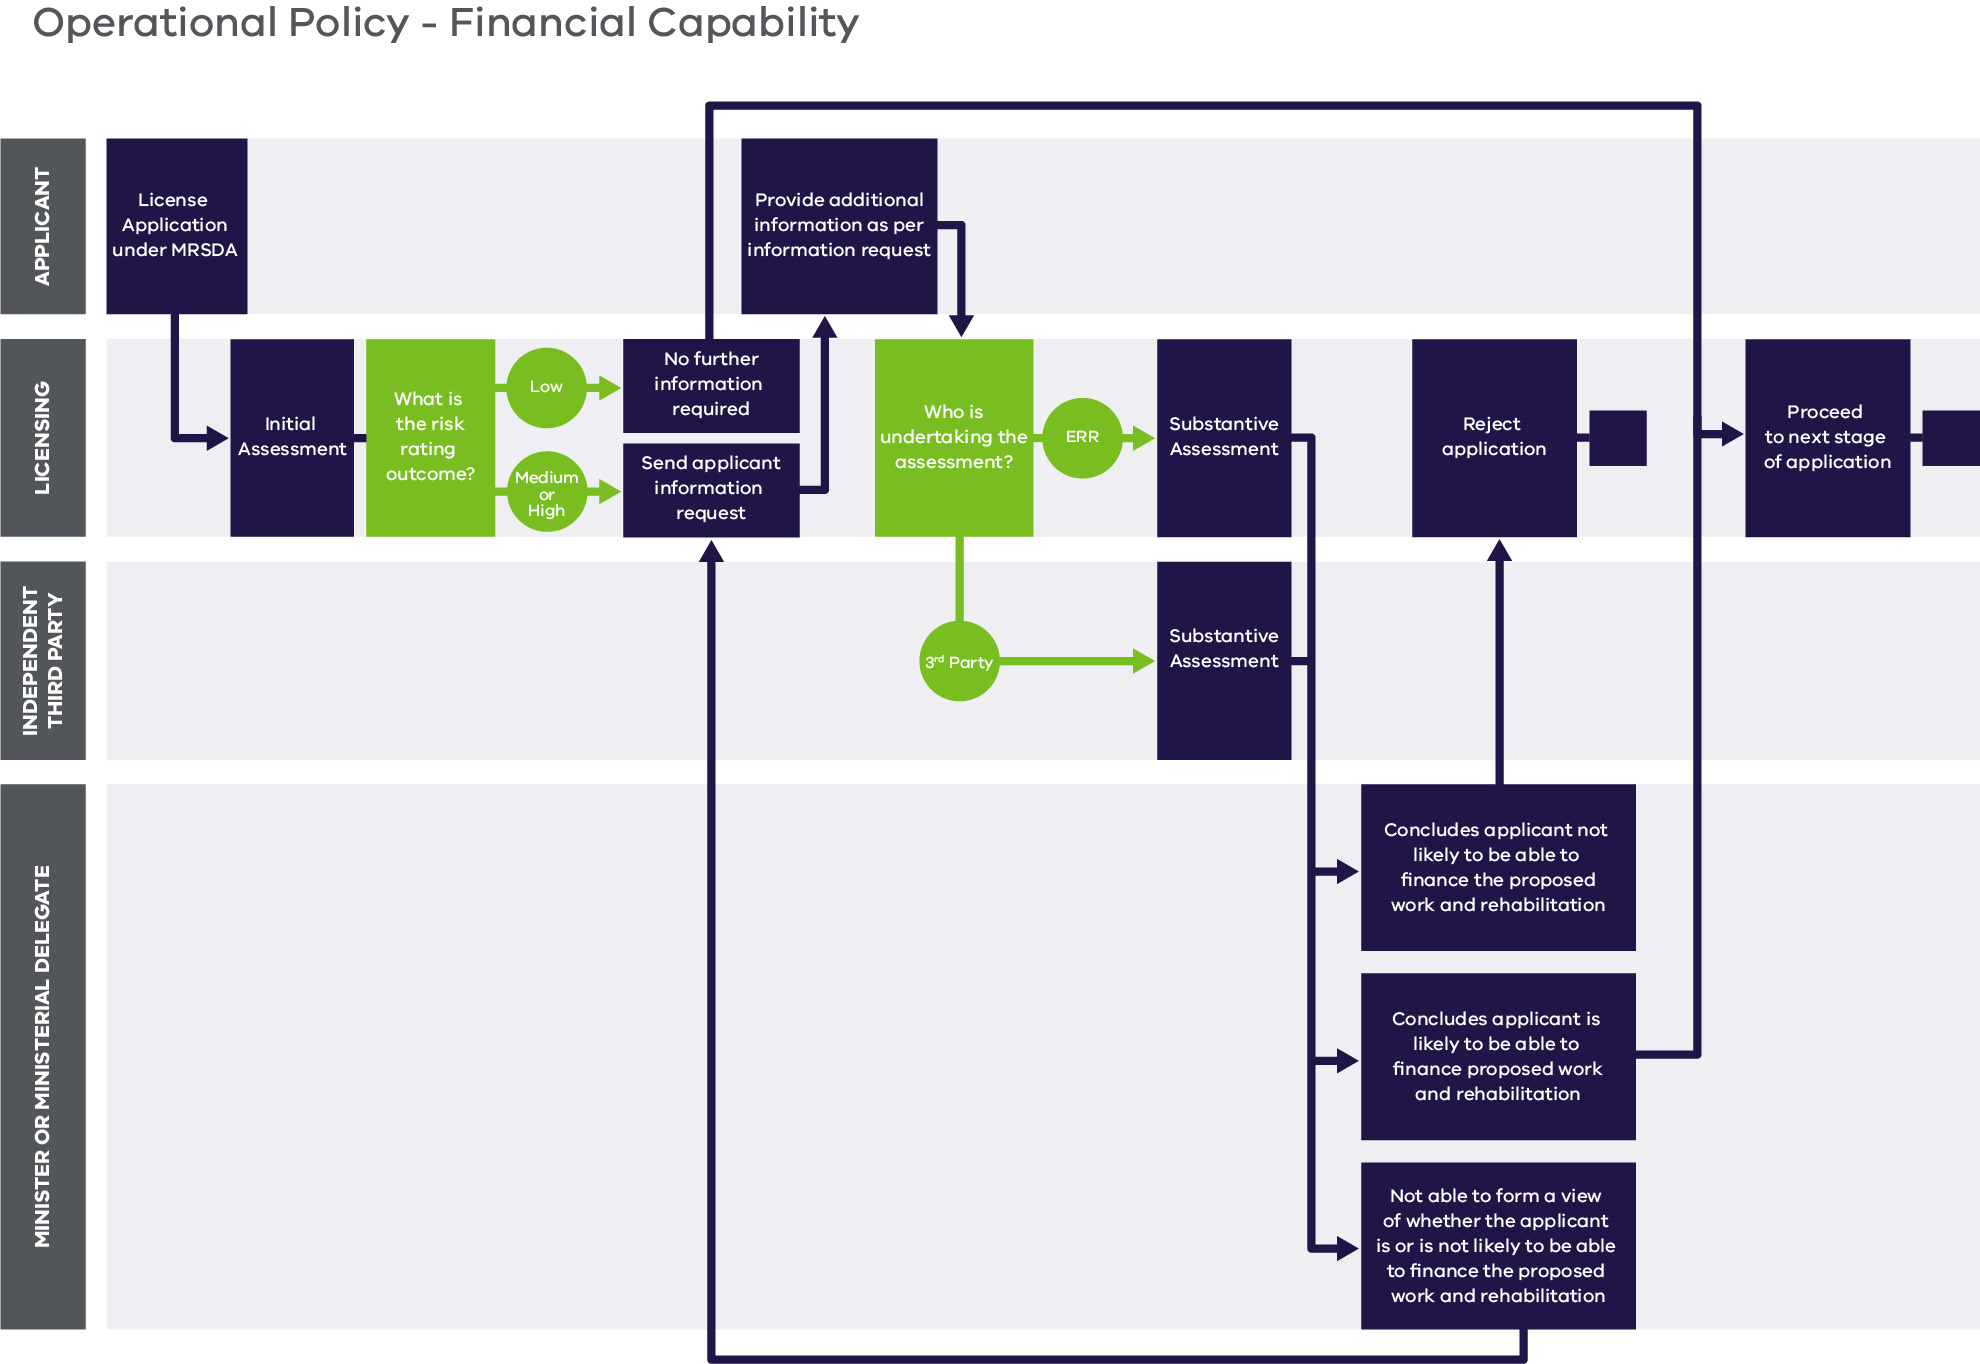 Schematic overview of the financial capability assessment process